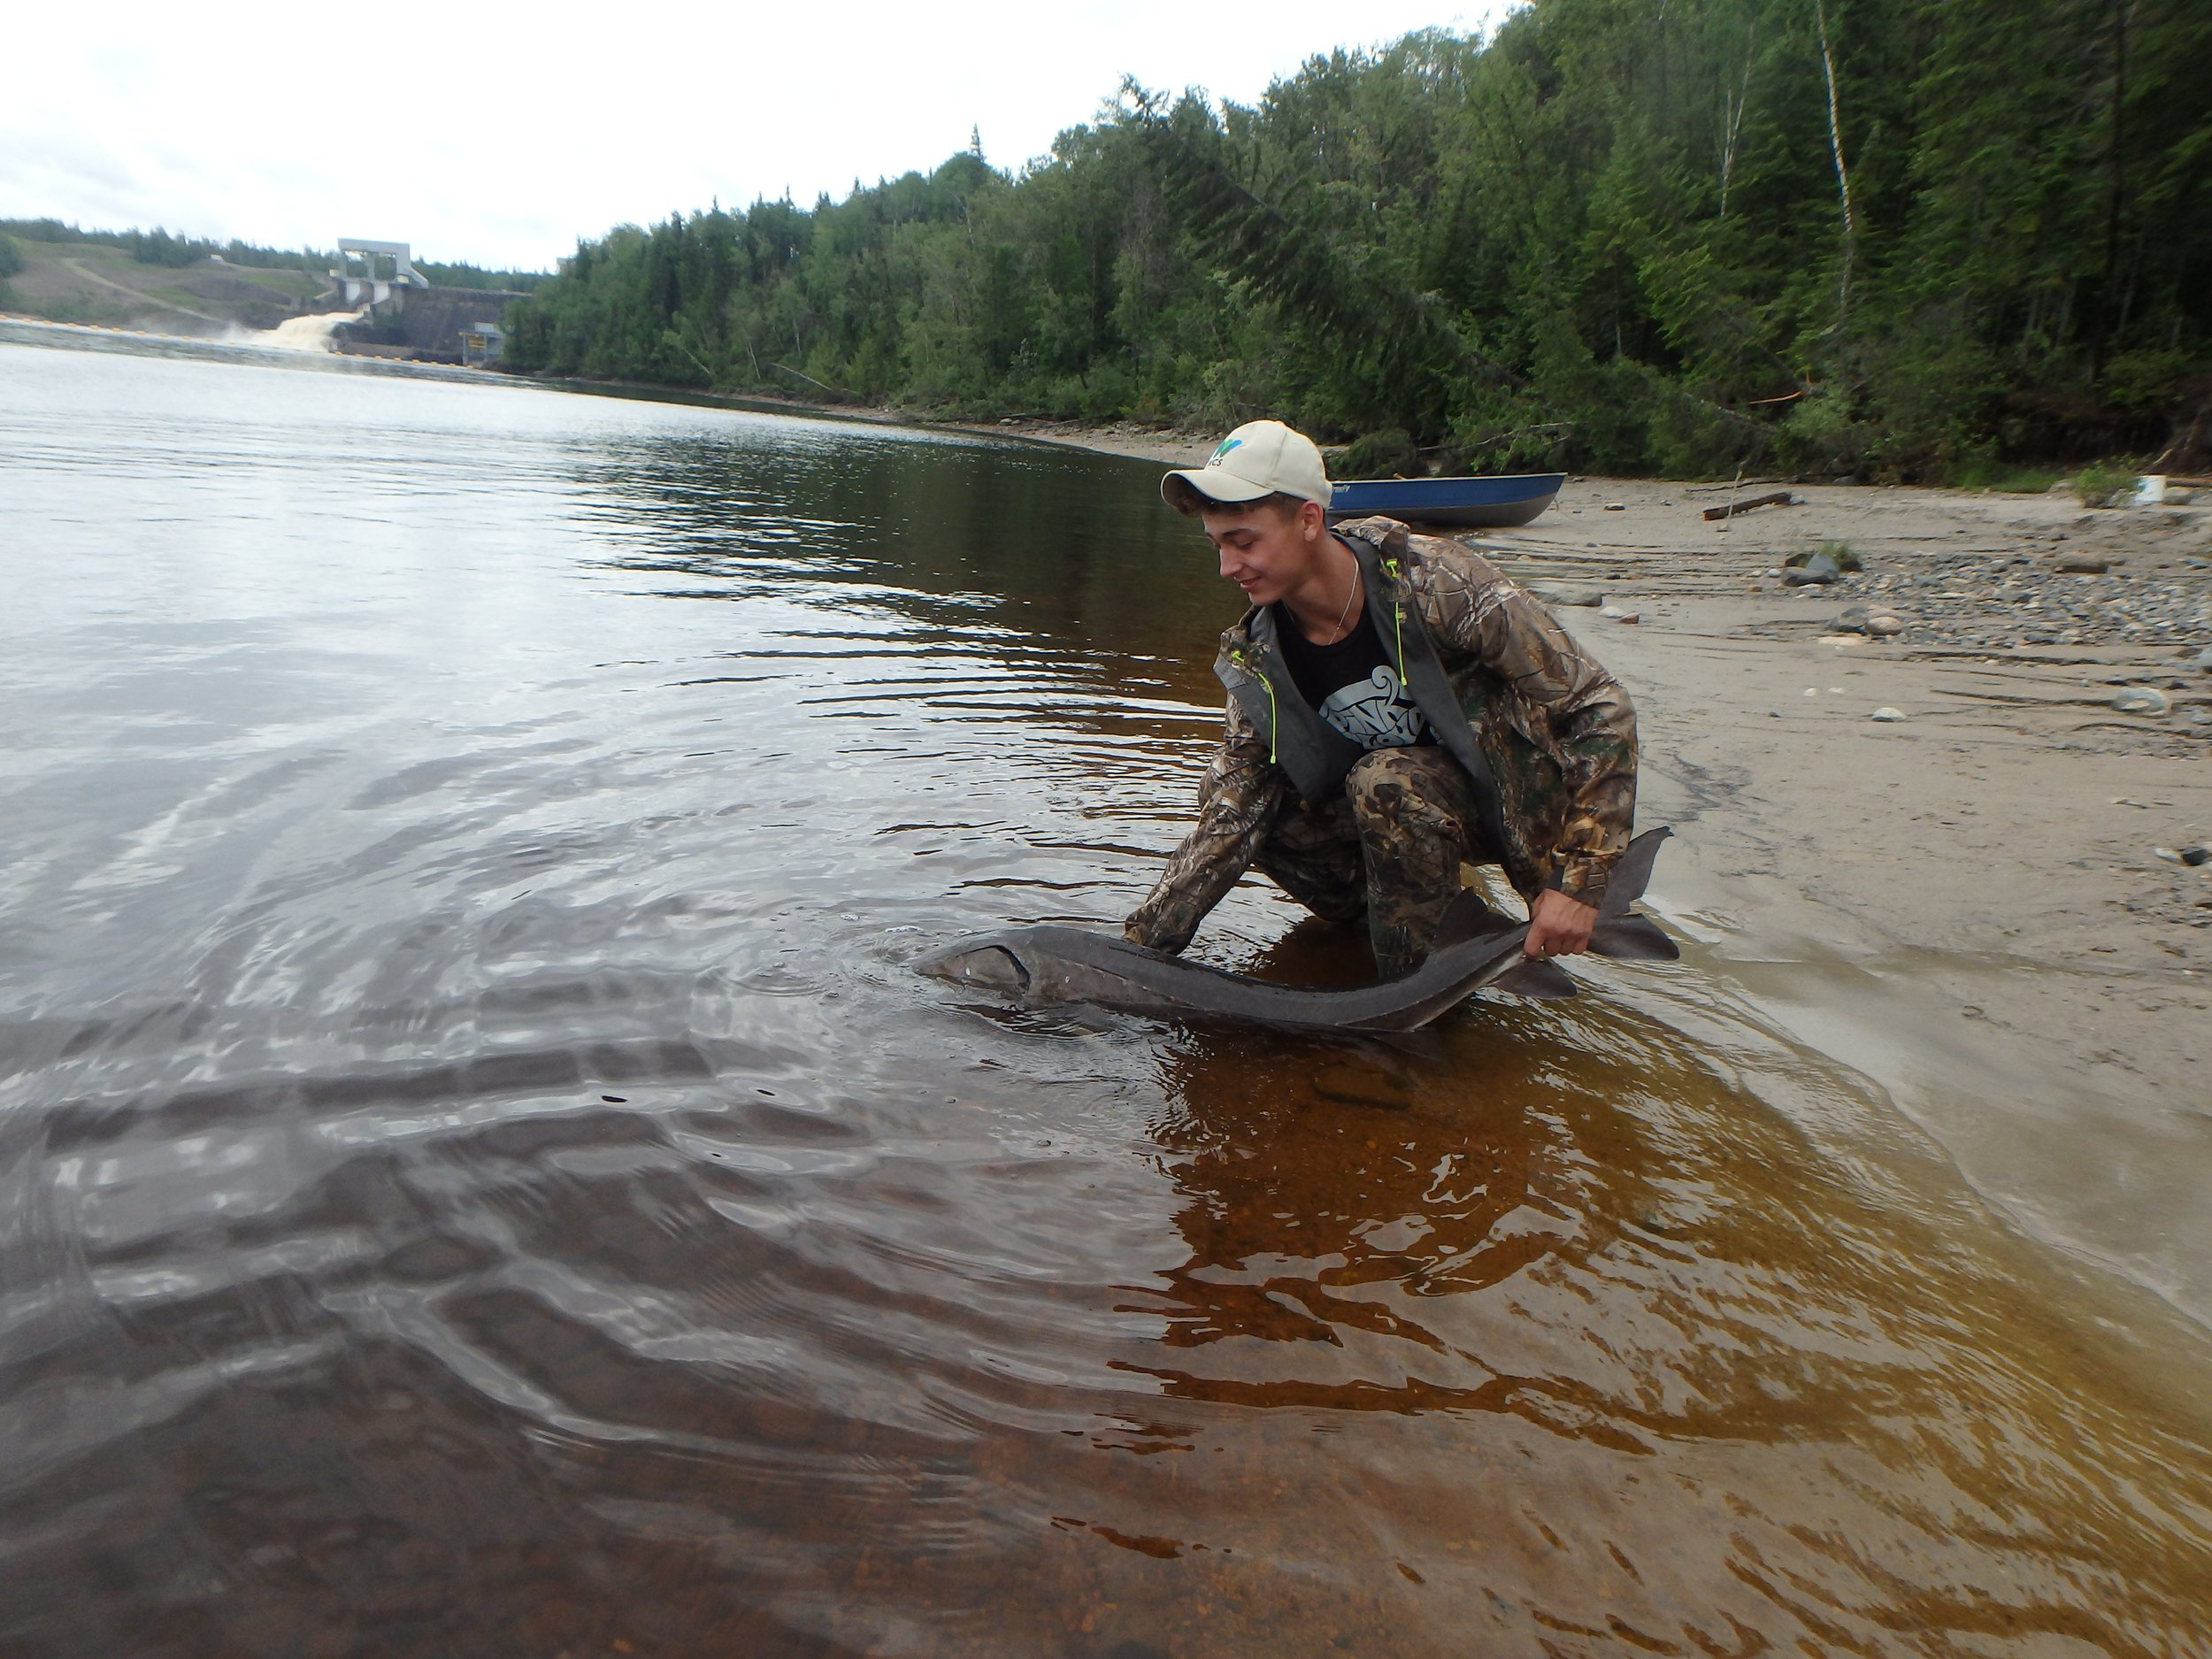 Justin Simard (MCFN youth) releases a lake sturgeon back into the water after it was sampled for the project. The samples from lake sturgeon can tell us about their health in this river.